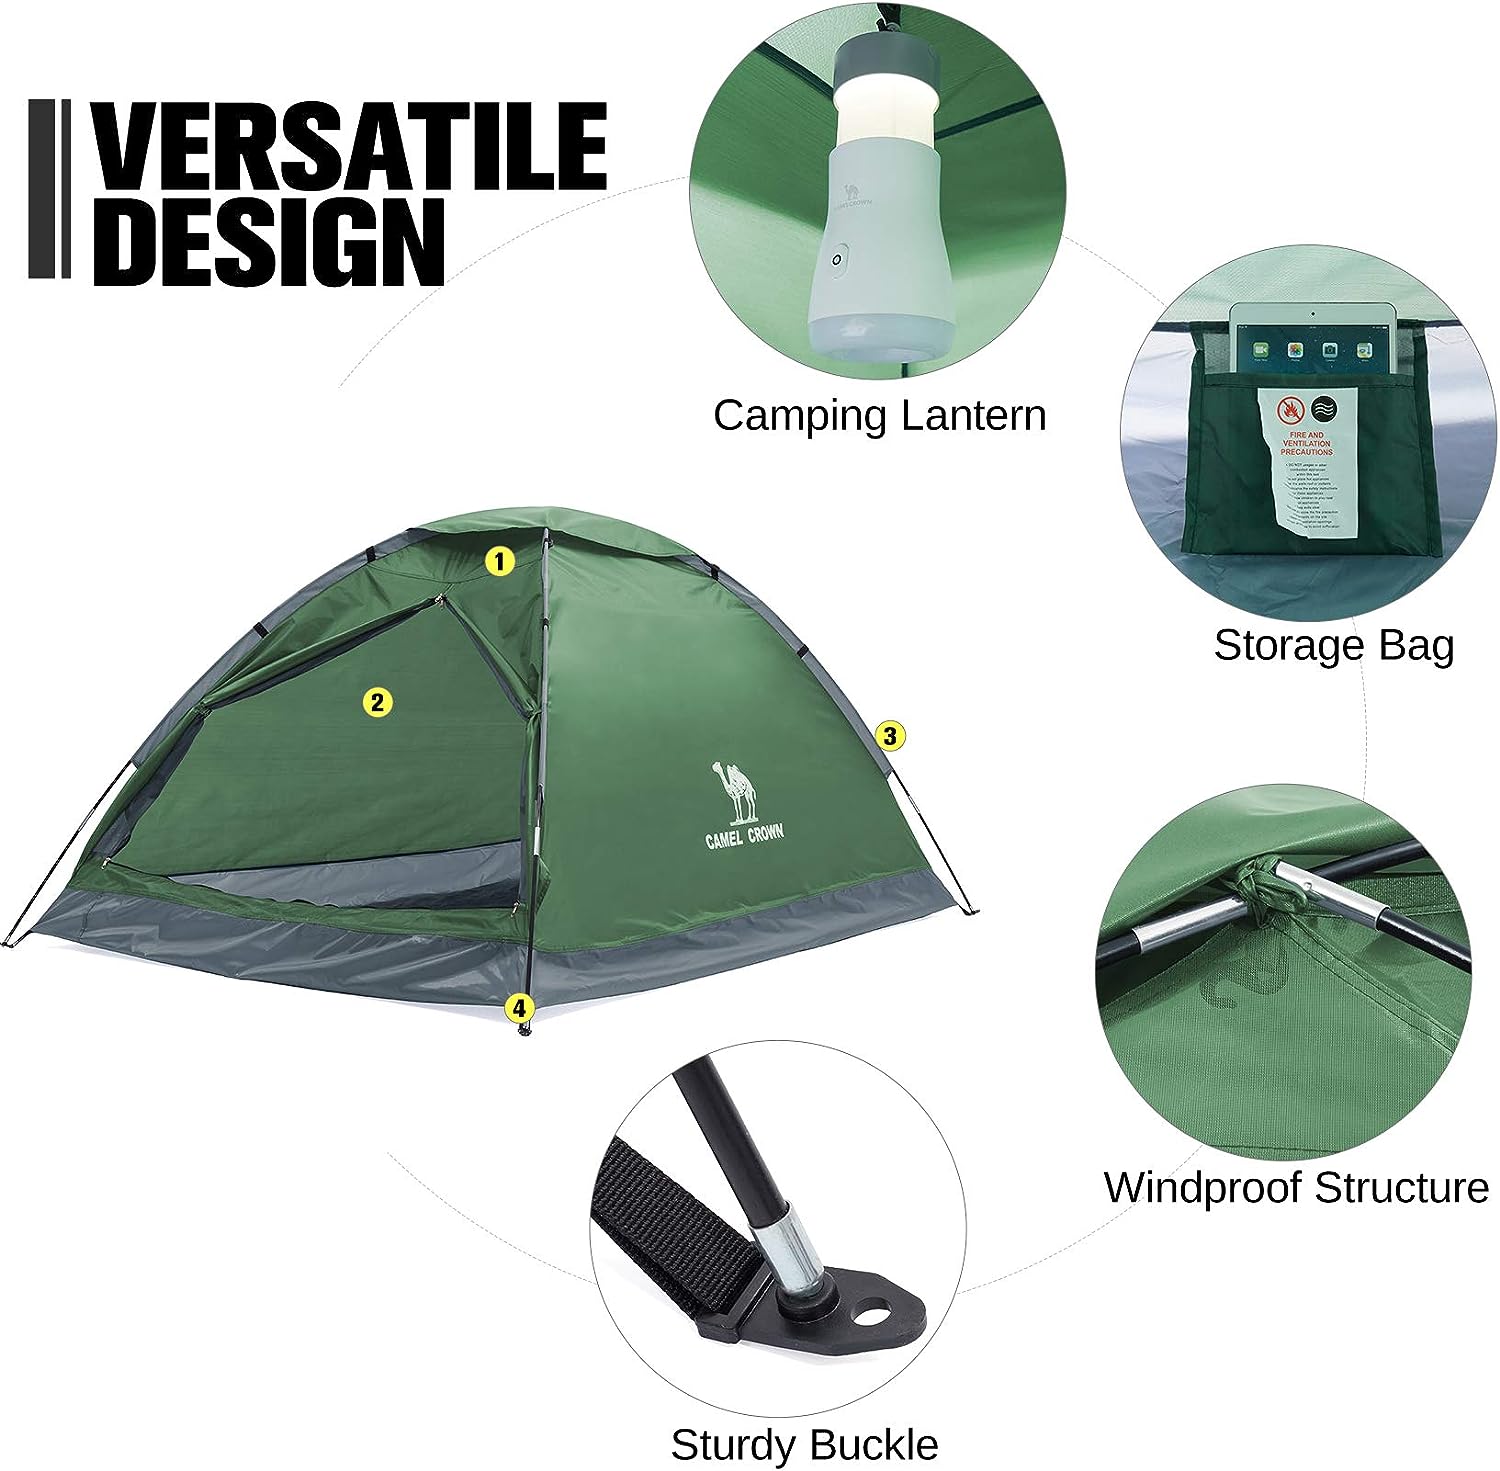 camel crown dome tent features